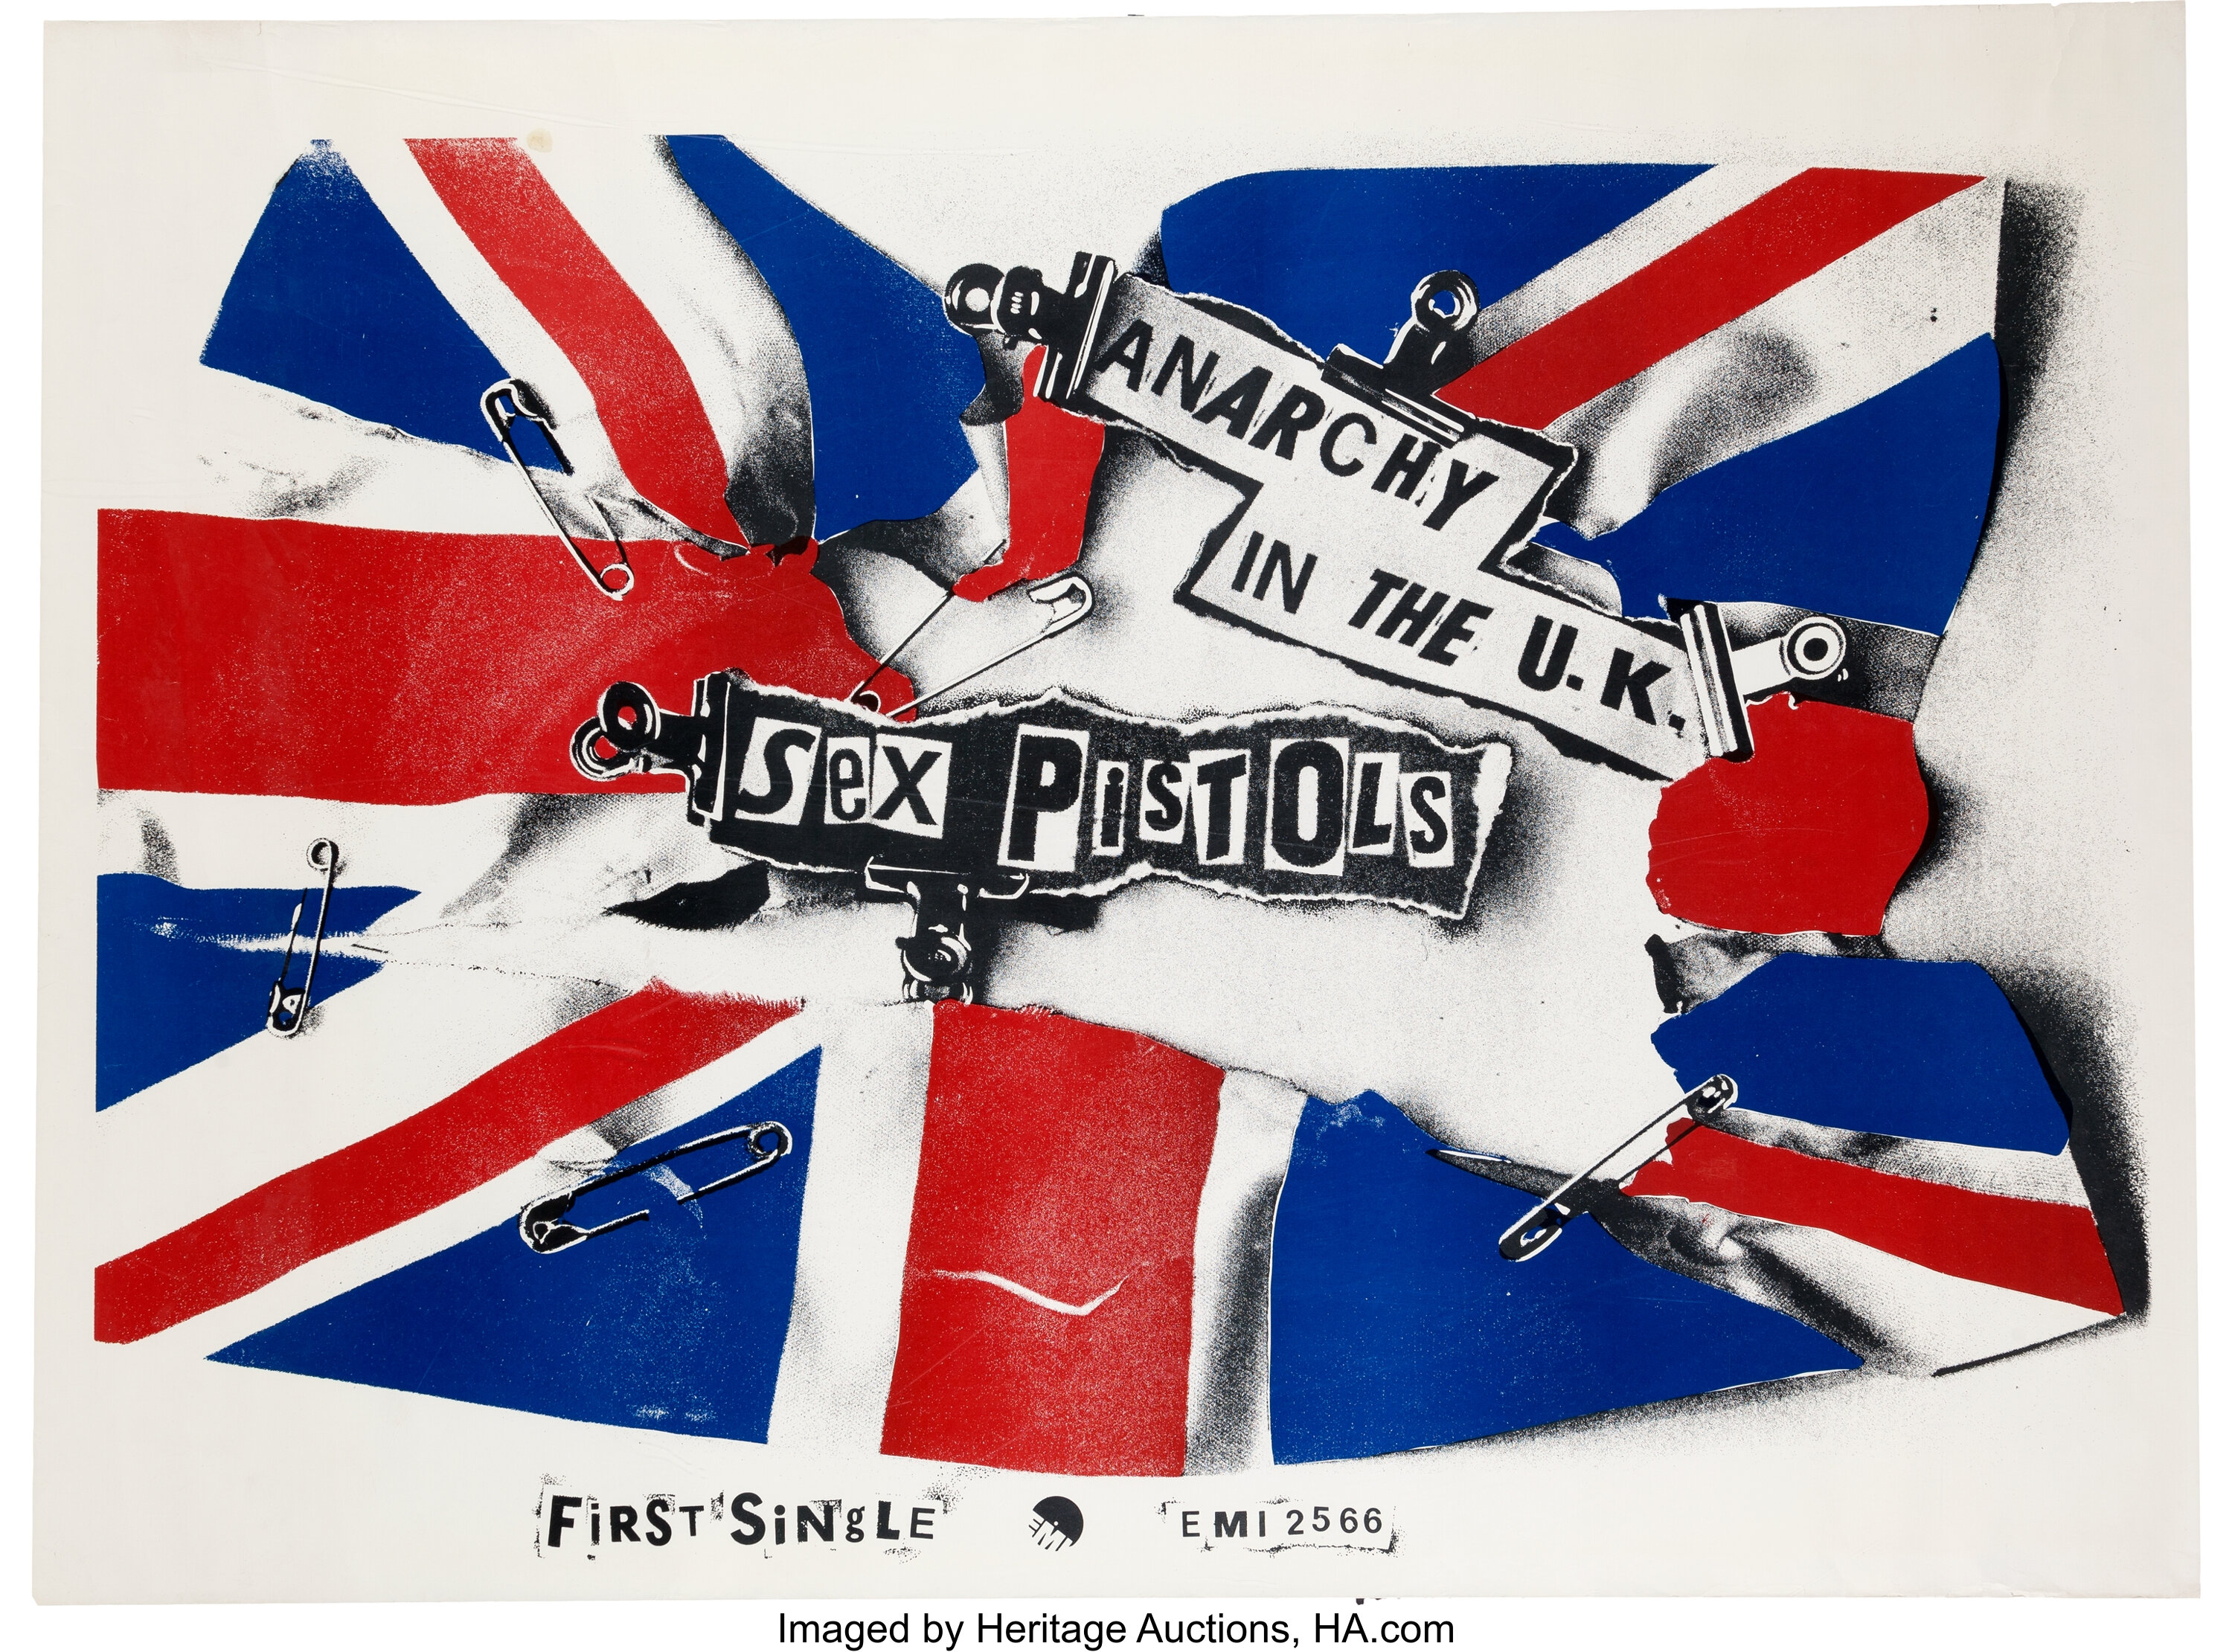 Sex Pistols Anarchy In The Uk Promo Poster Emi 1976 Music Lot 89311 Heritage Auctions